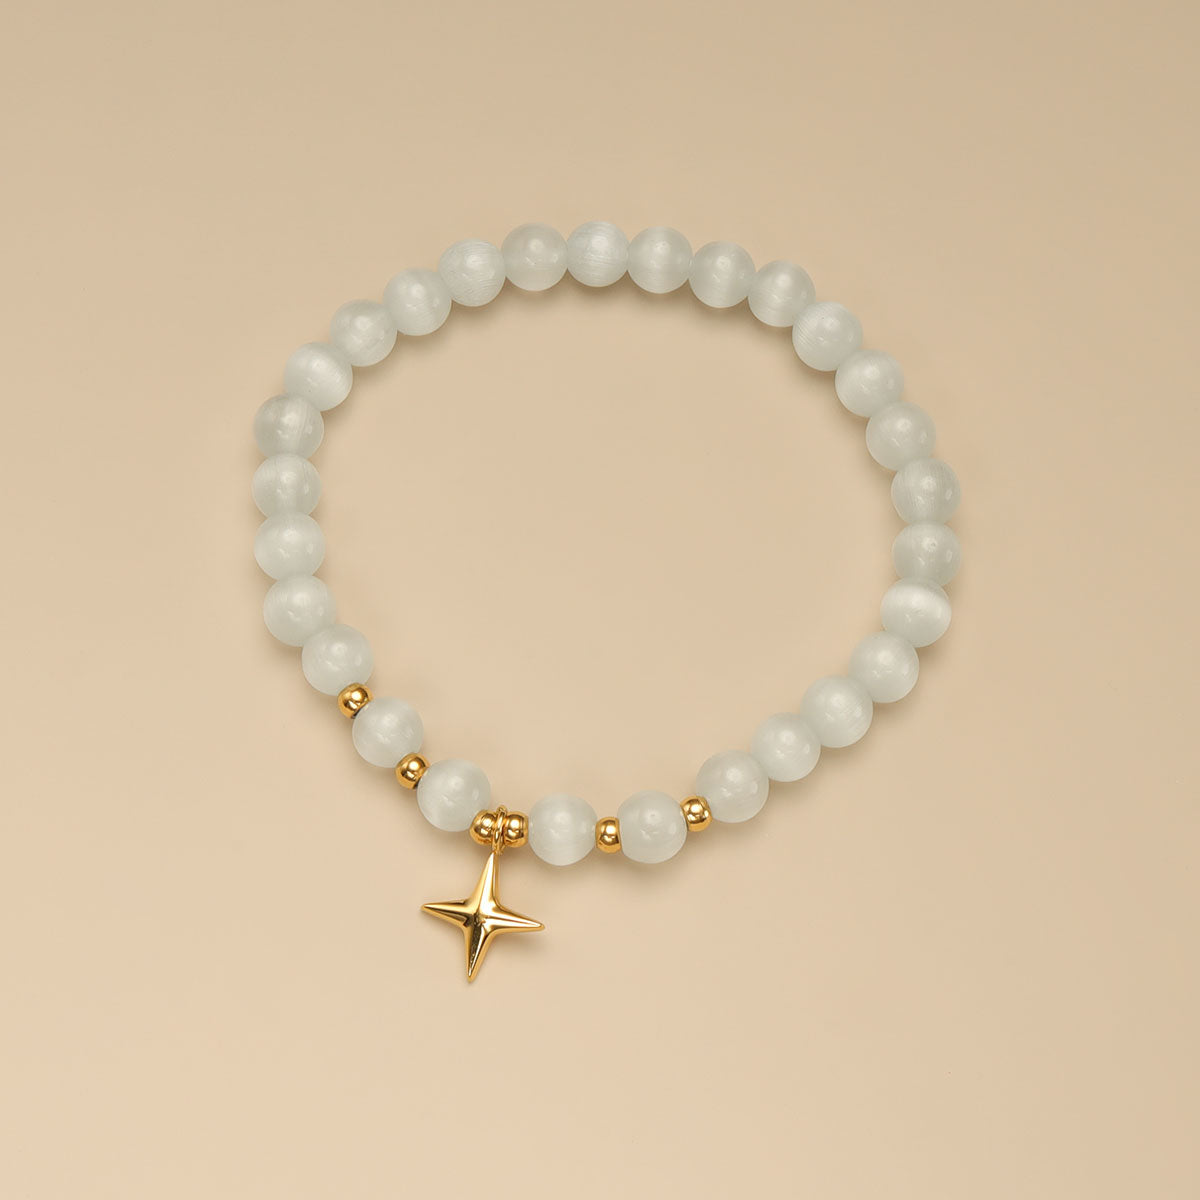 A moonstone bracelet with star on it.